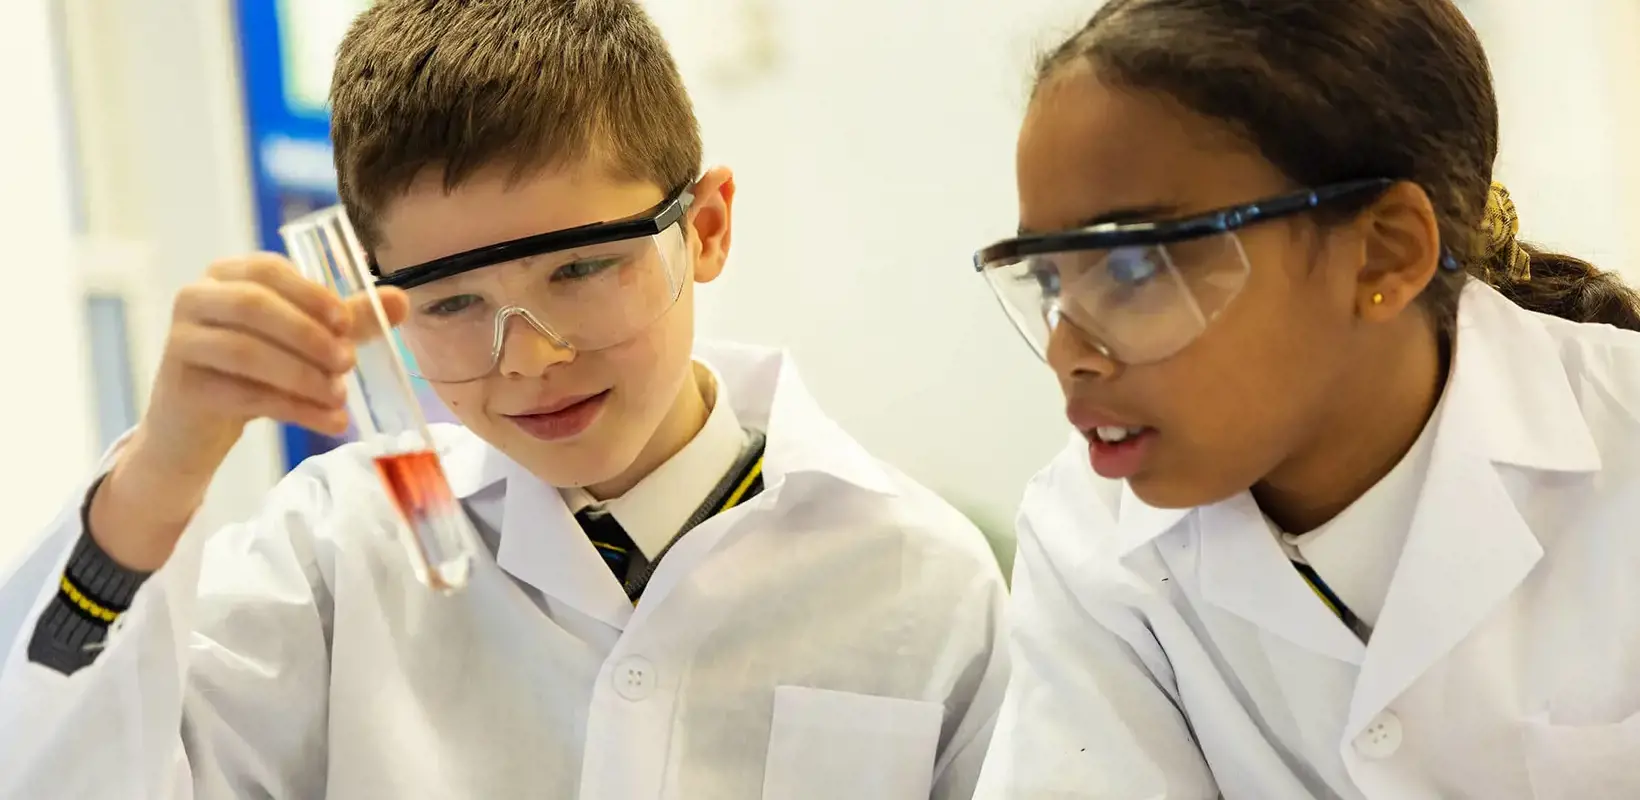 Prep School pupils in science class at The Ryleys School, a private school in Cheshire